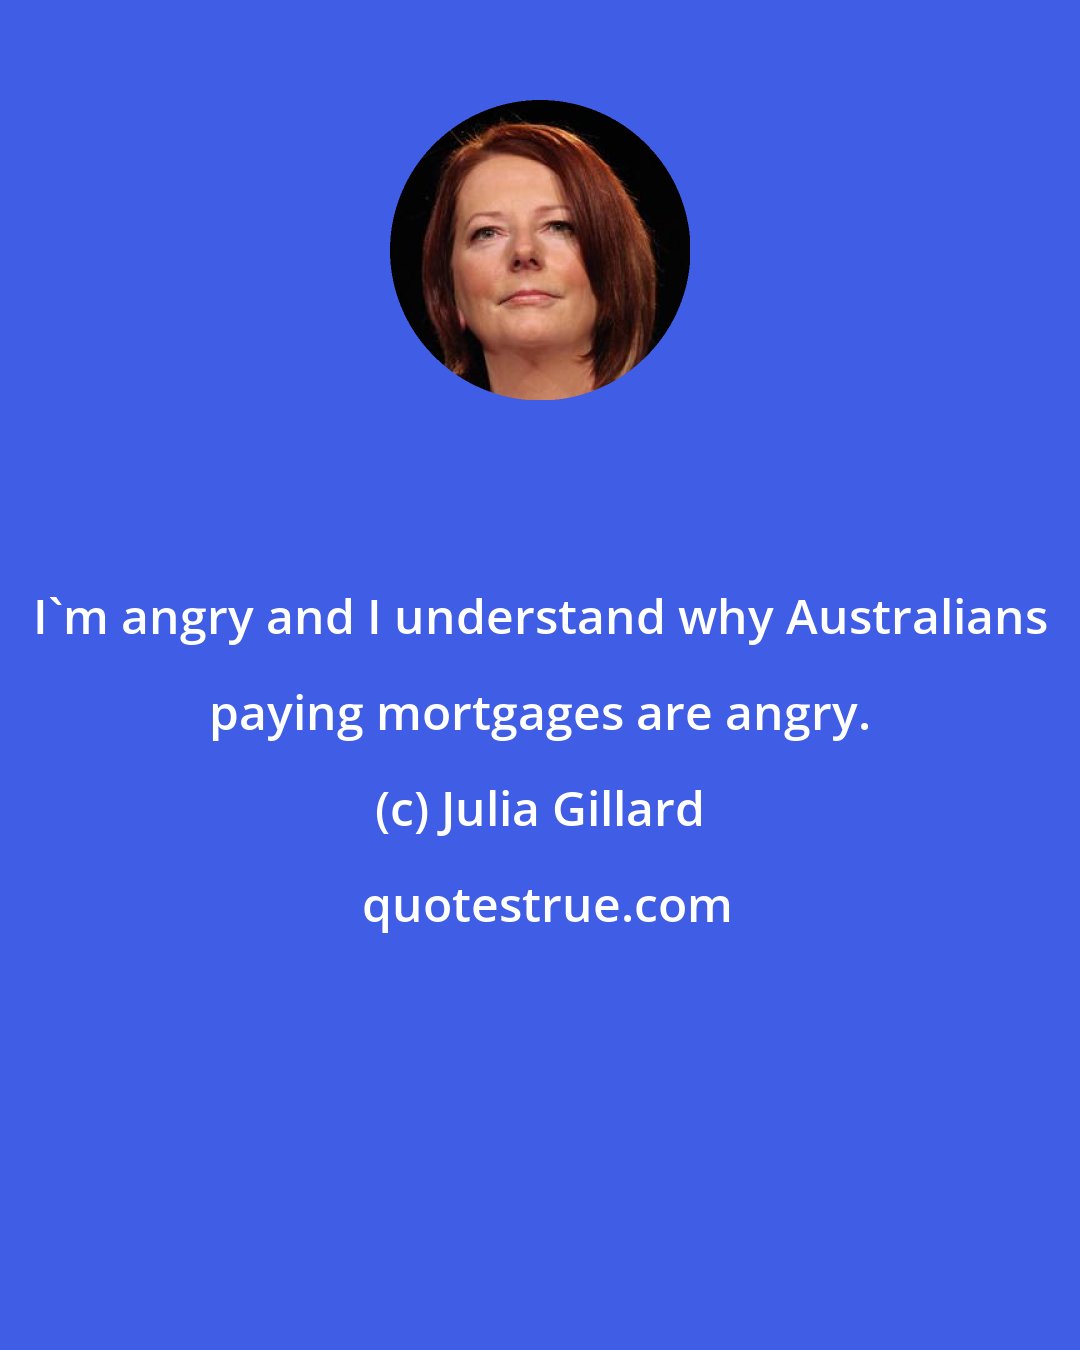 Julia Gillard: I'm angry and I understand why Australians paying mortgages are angry.